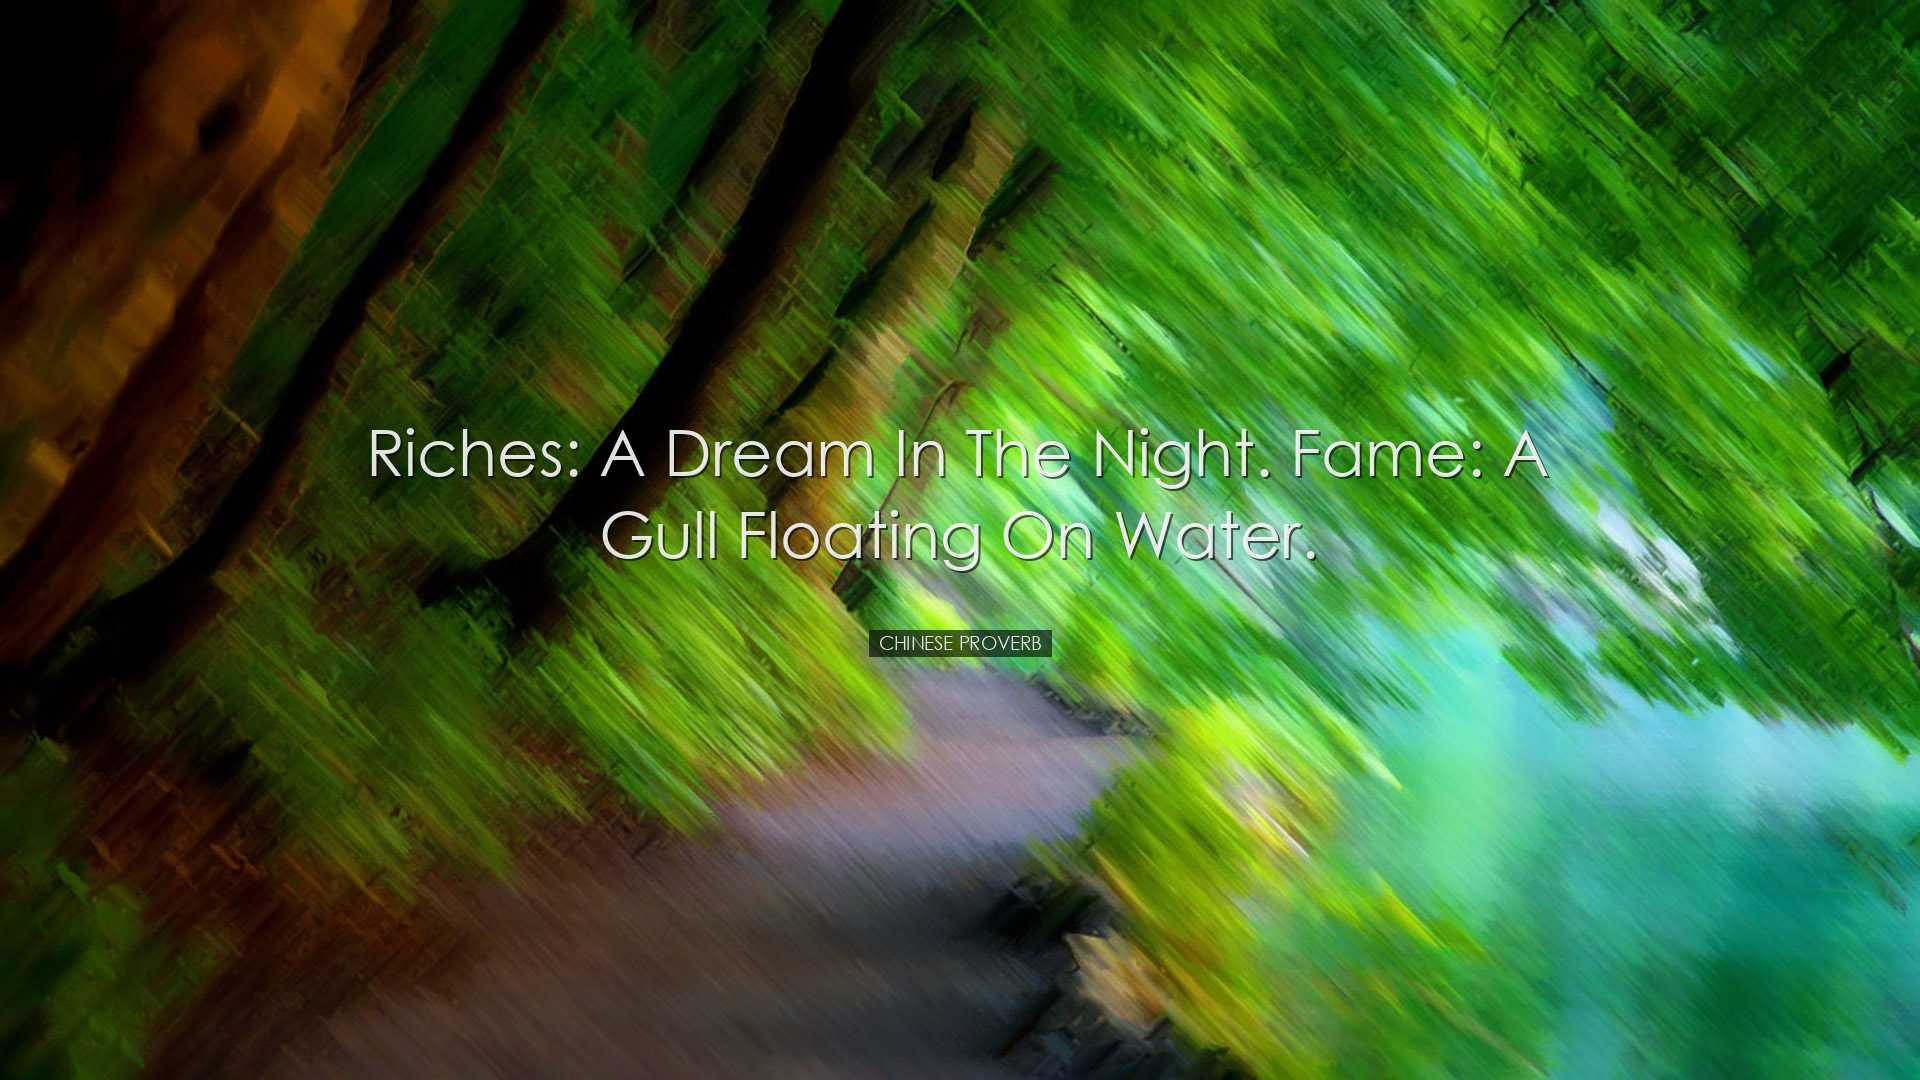 Riches: A dream in the night. Fame: A gull floating on water. - Ch